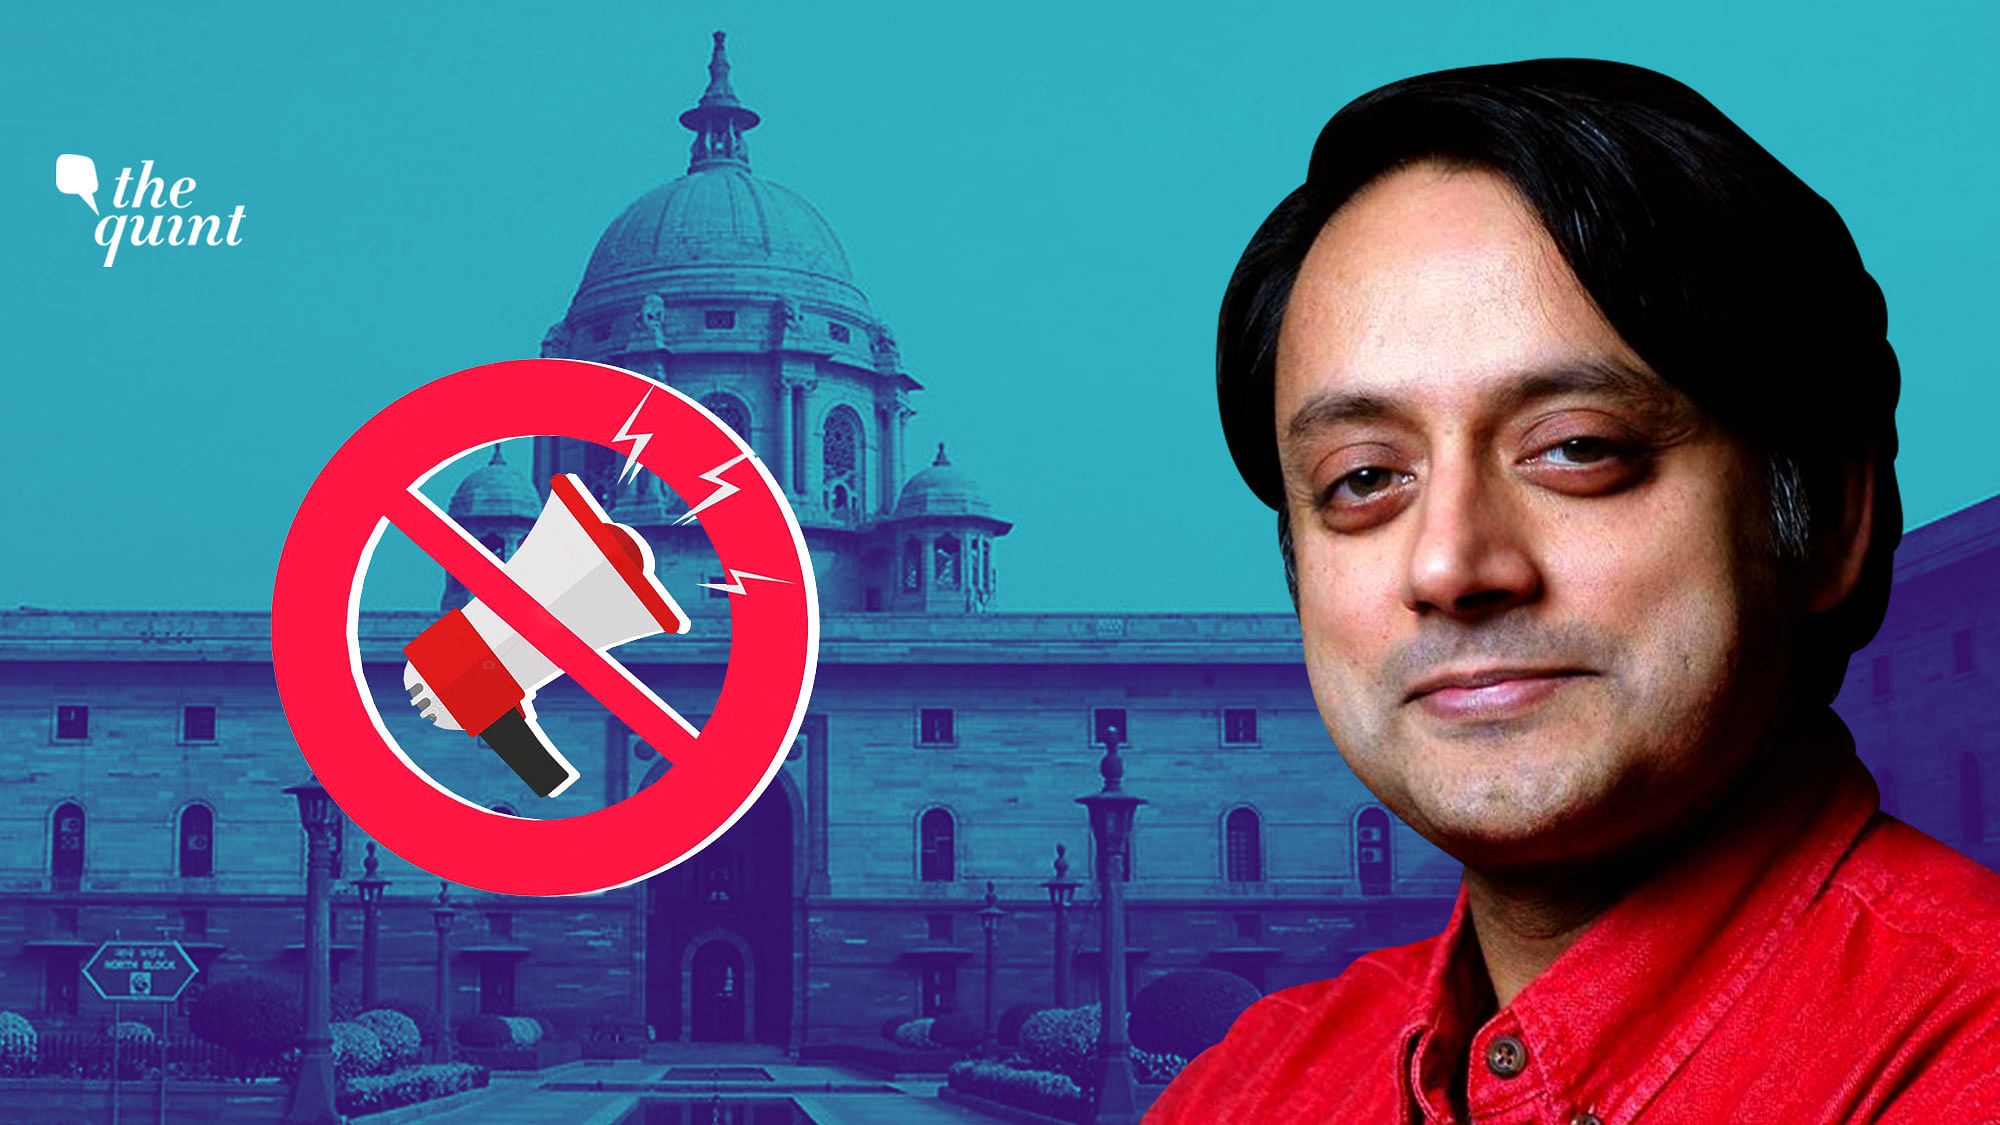 Congress MP Shashi Tharoor argues that the gag order restrains former officials from speaking out about government failures in security or intelligence, challenging policies, and even prevents exposure of corruption. 